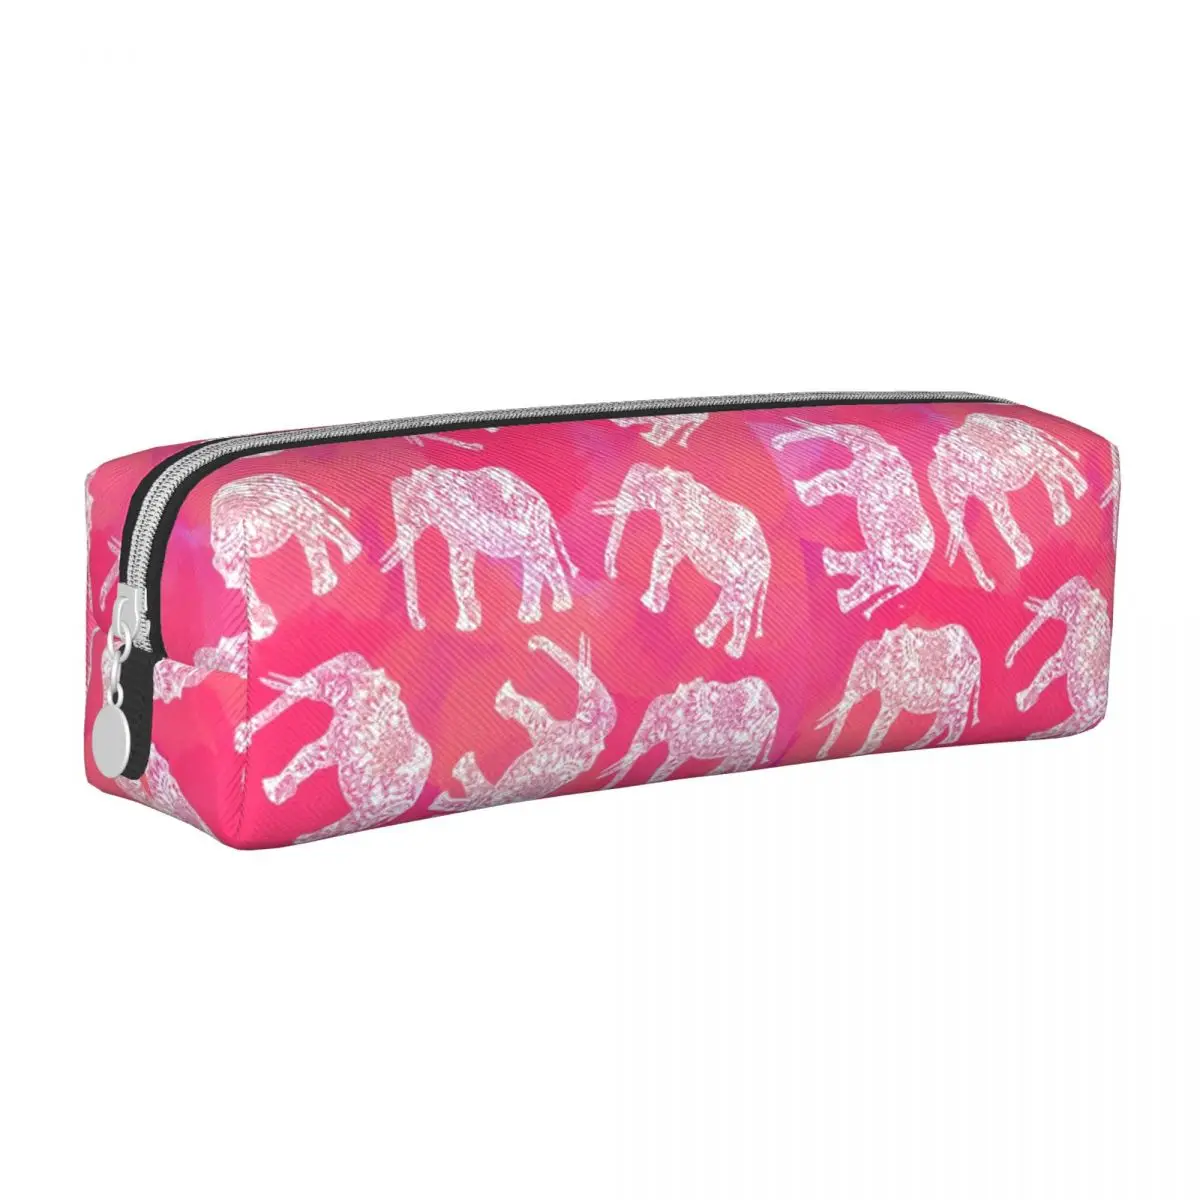 

Tribal Floral Elephant Square Pencil Case Pink Animal Print For Teens Vintage Leather Pencil Box Stationery Zipper Pen Bags